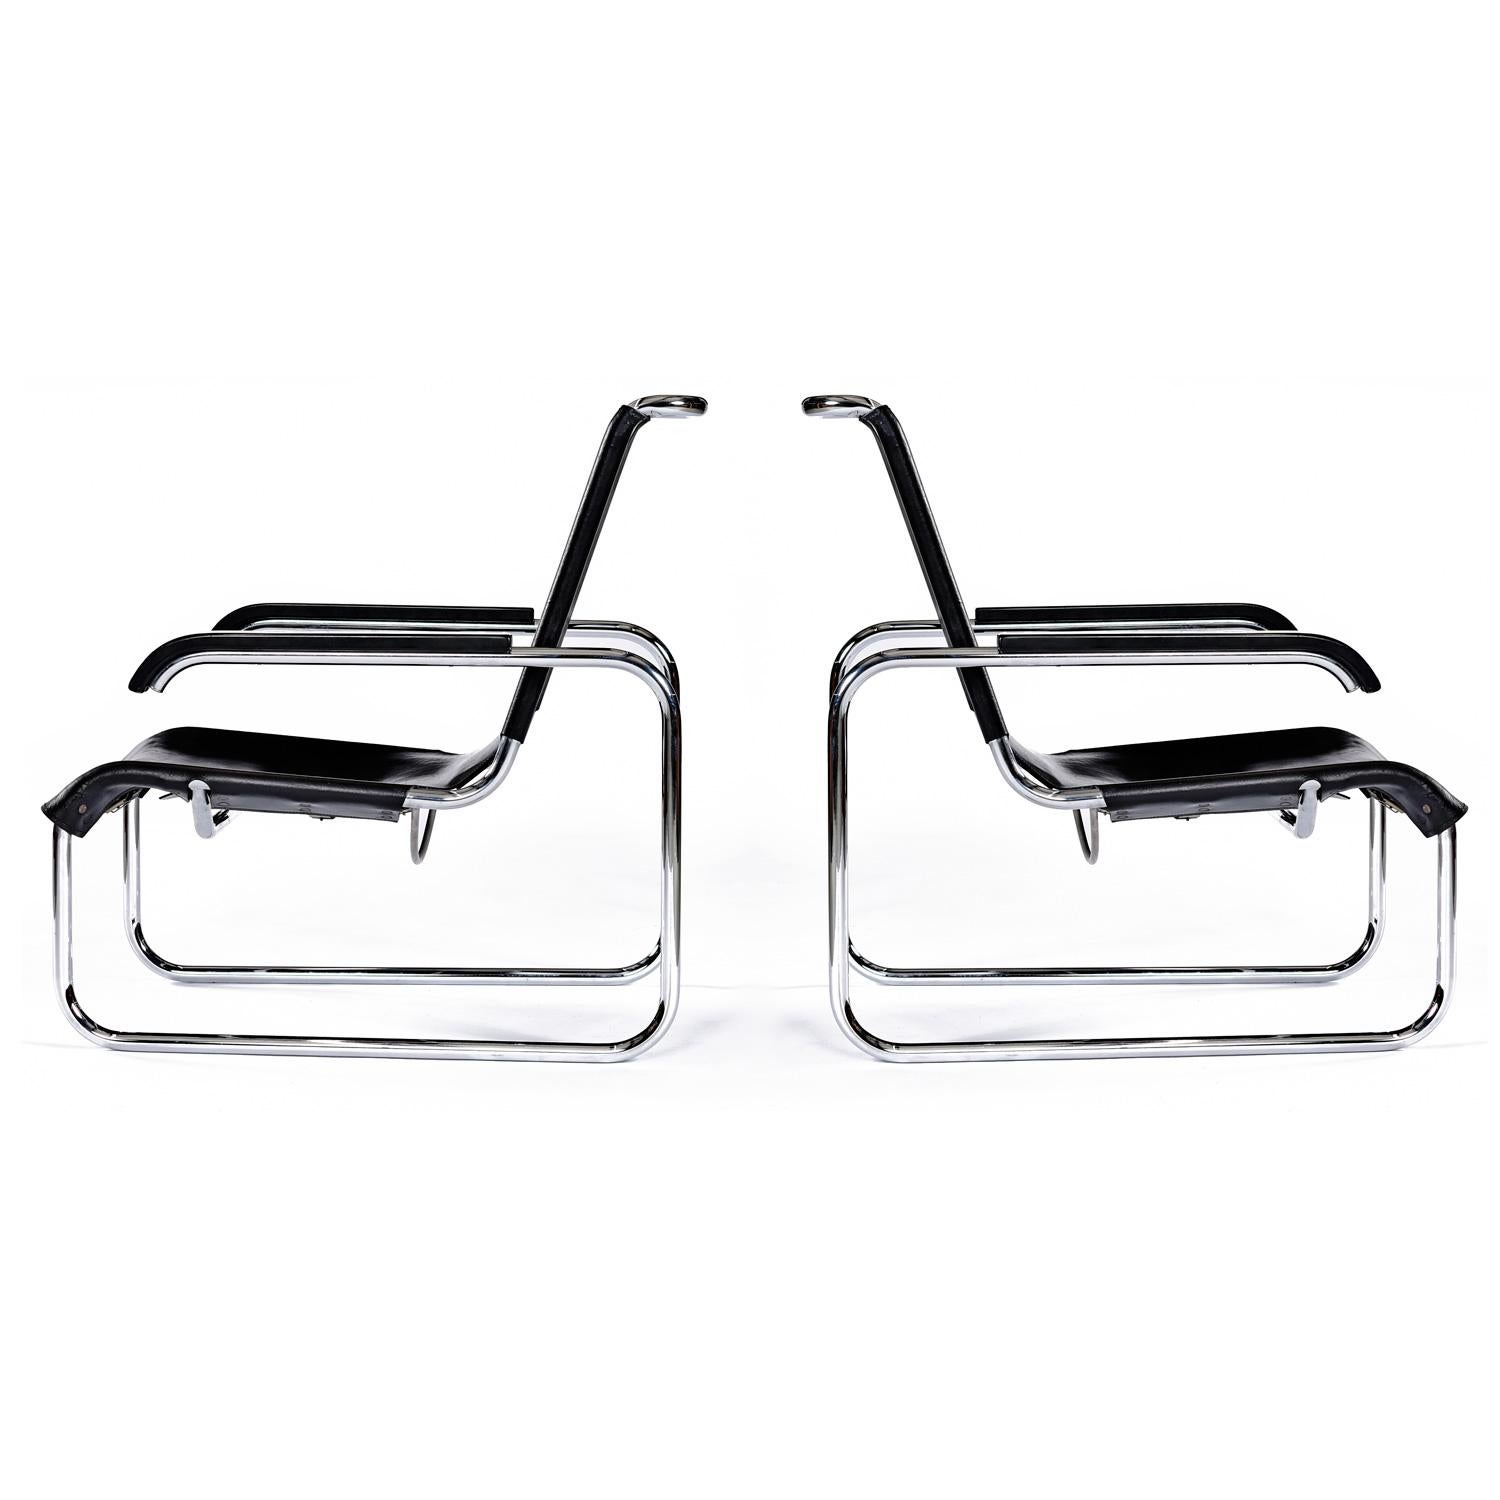 Handsome set of mid-century modern cantilever black leather lounge chairs designed by Marcel Breuer for Thonet.  These model B35 armchairs demonstrate a European Modern Bauhaus discipline that will keep them forever timeless.  The tubular chromed